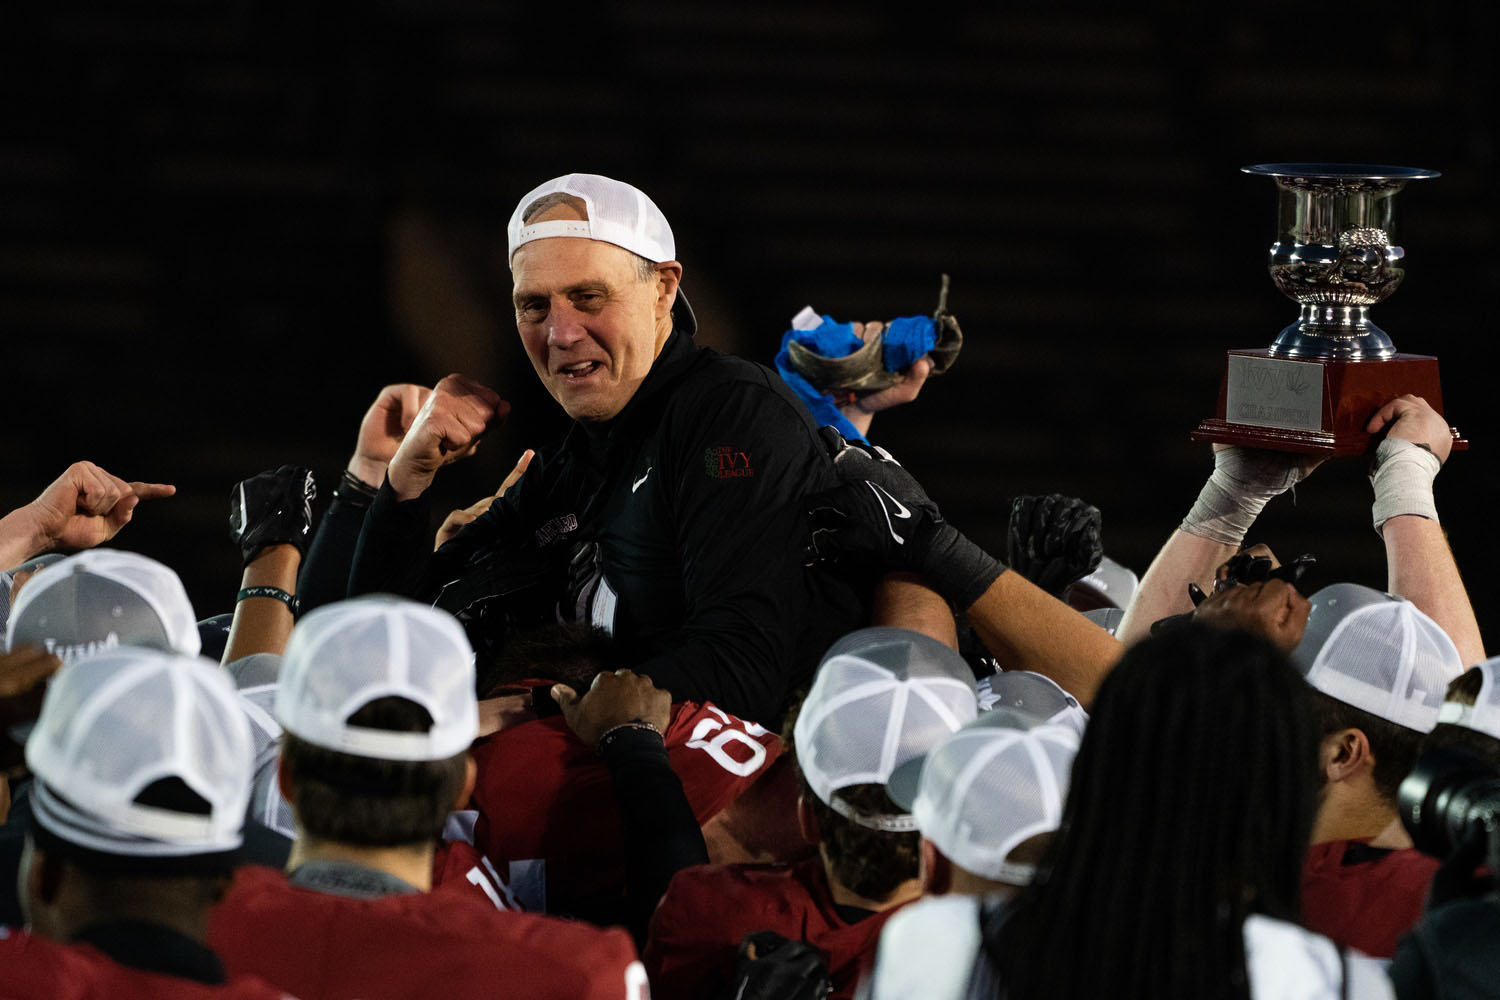 Harvard football head coach Tim Murphy celebrates with his players after his team's victory over Penn, which secured a share of the Ivy League title for the Crimson.